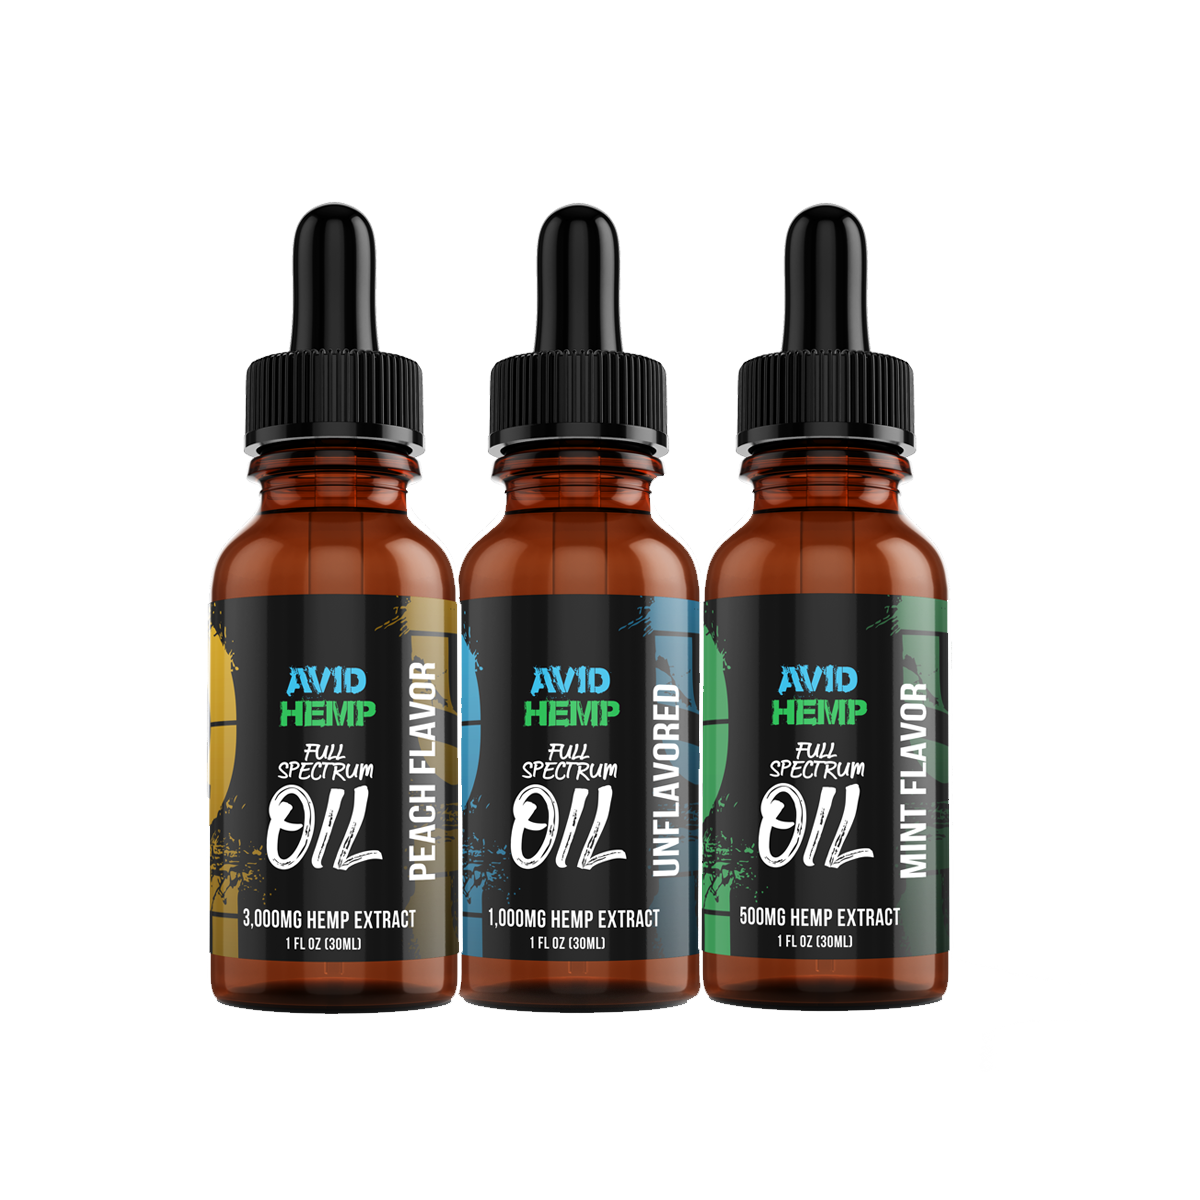 CBD OIL BY Swdistro-Comprehensive Analysis of the Top CBD Oil Products